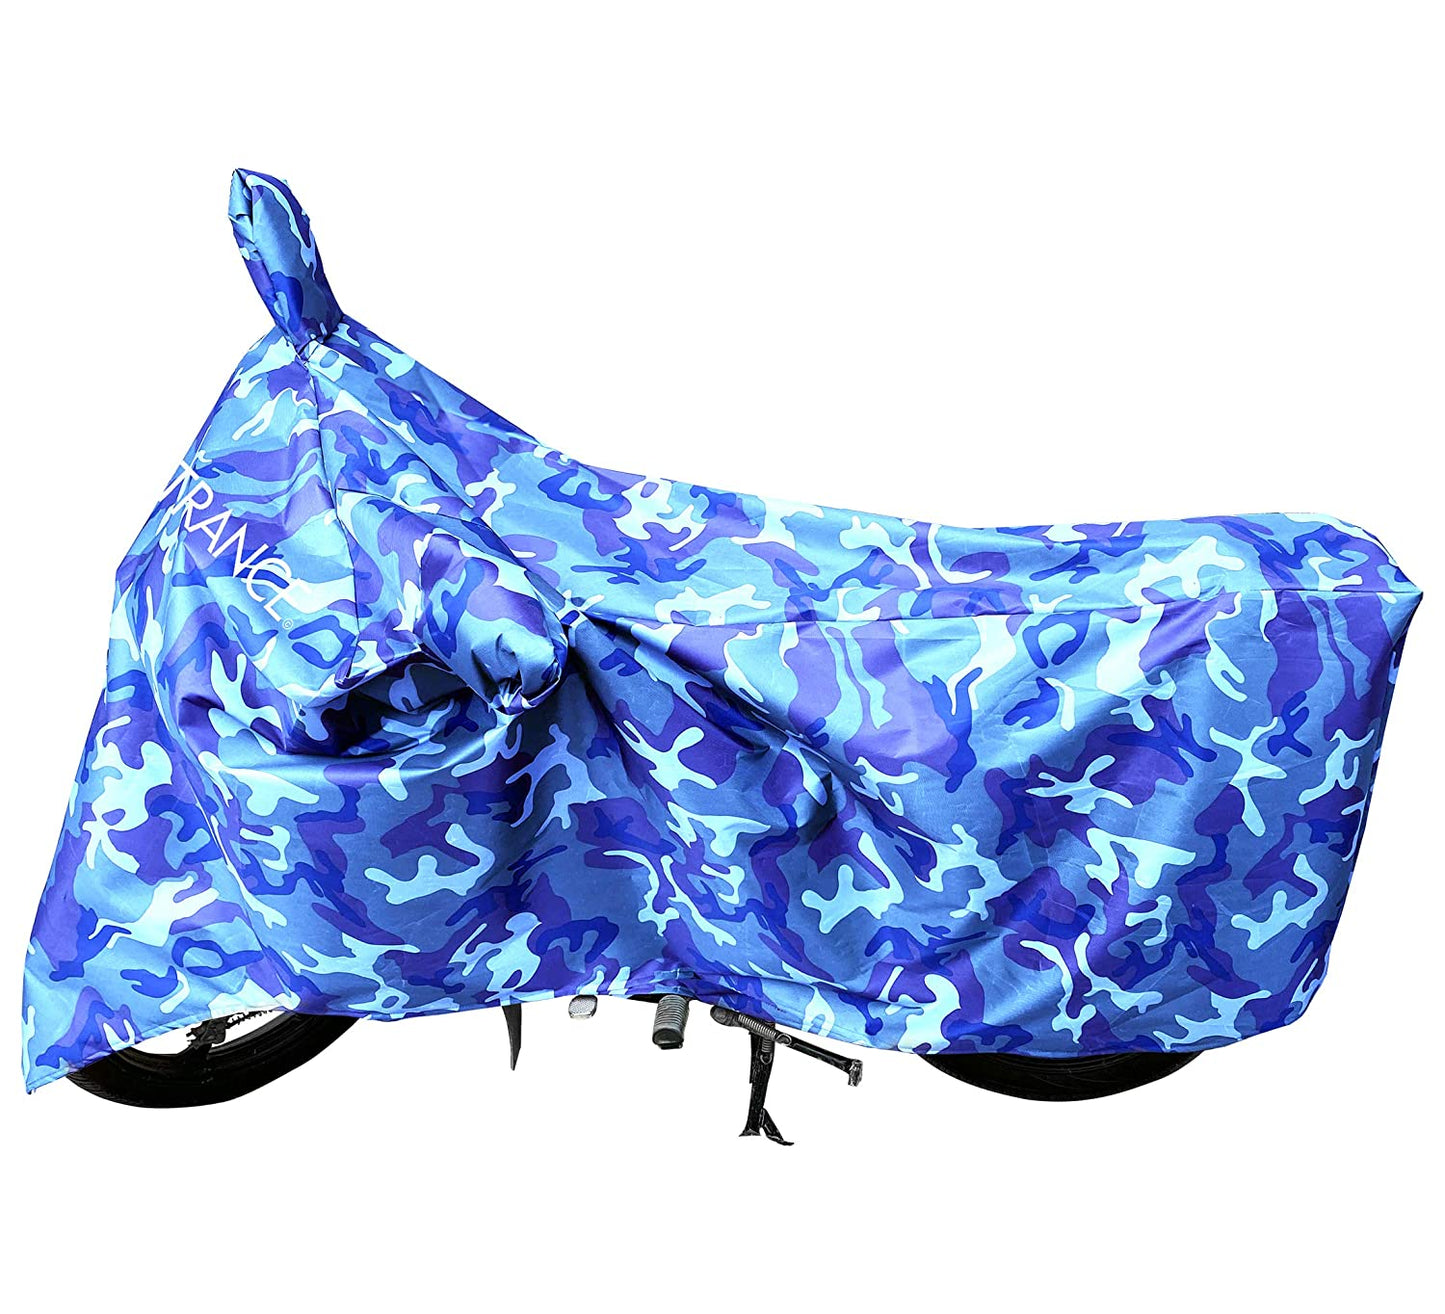 MotoTrance Jungle Bike Body Covers For Mahindra Mojo - Interlock-Stitched Waterproof and Heat Resistant with Mirror Pockets